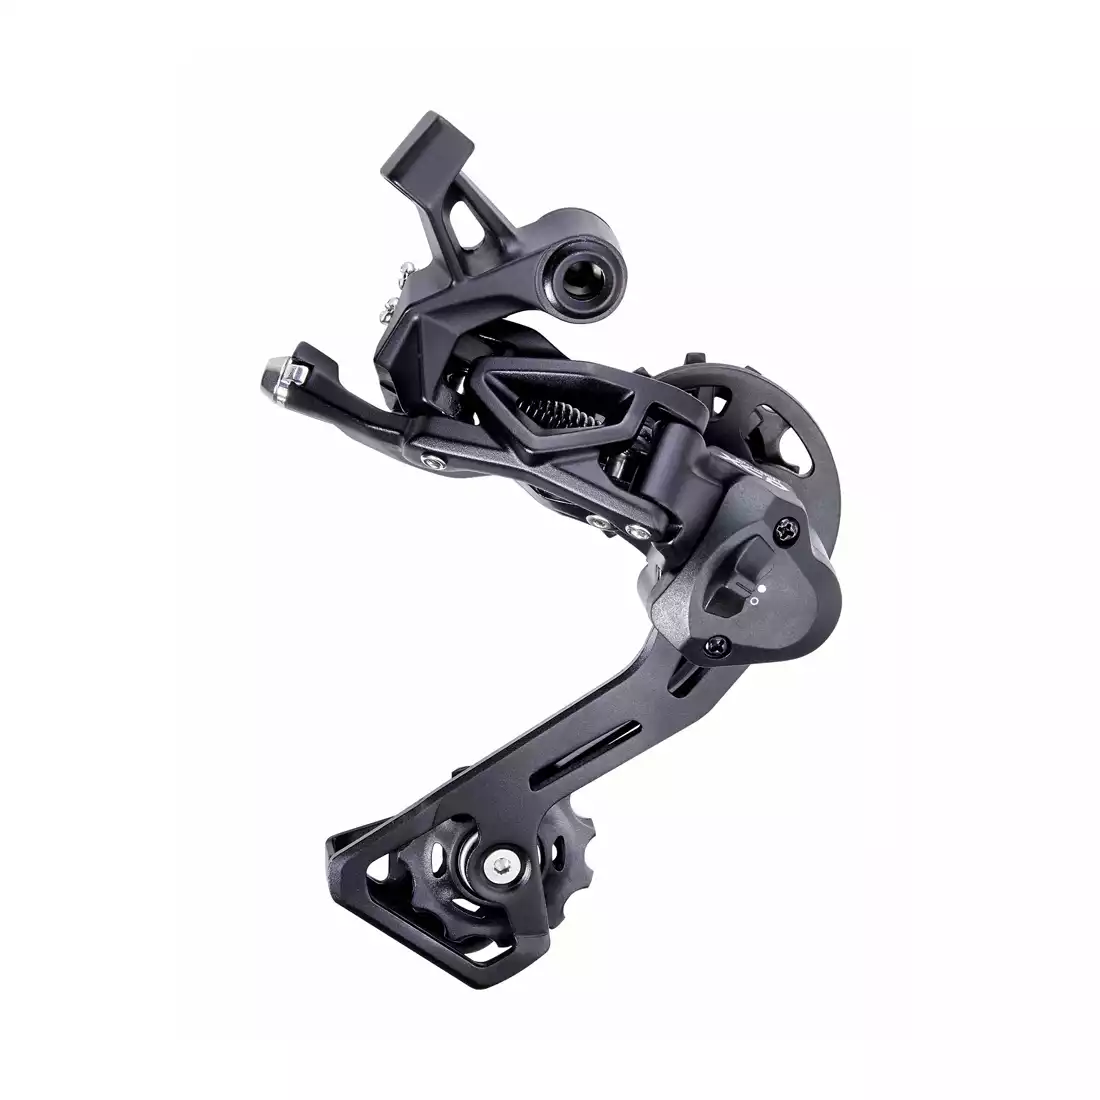 MICROSHIFT XCD 11-speed bicycle rear derailleur, black